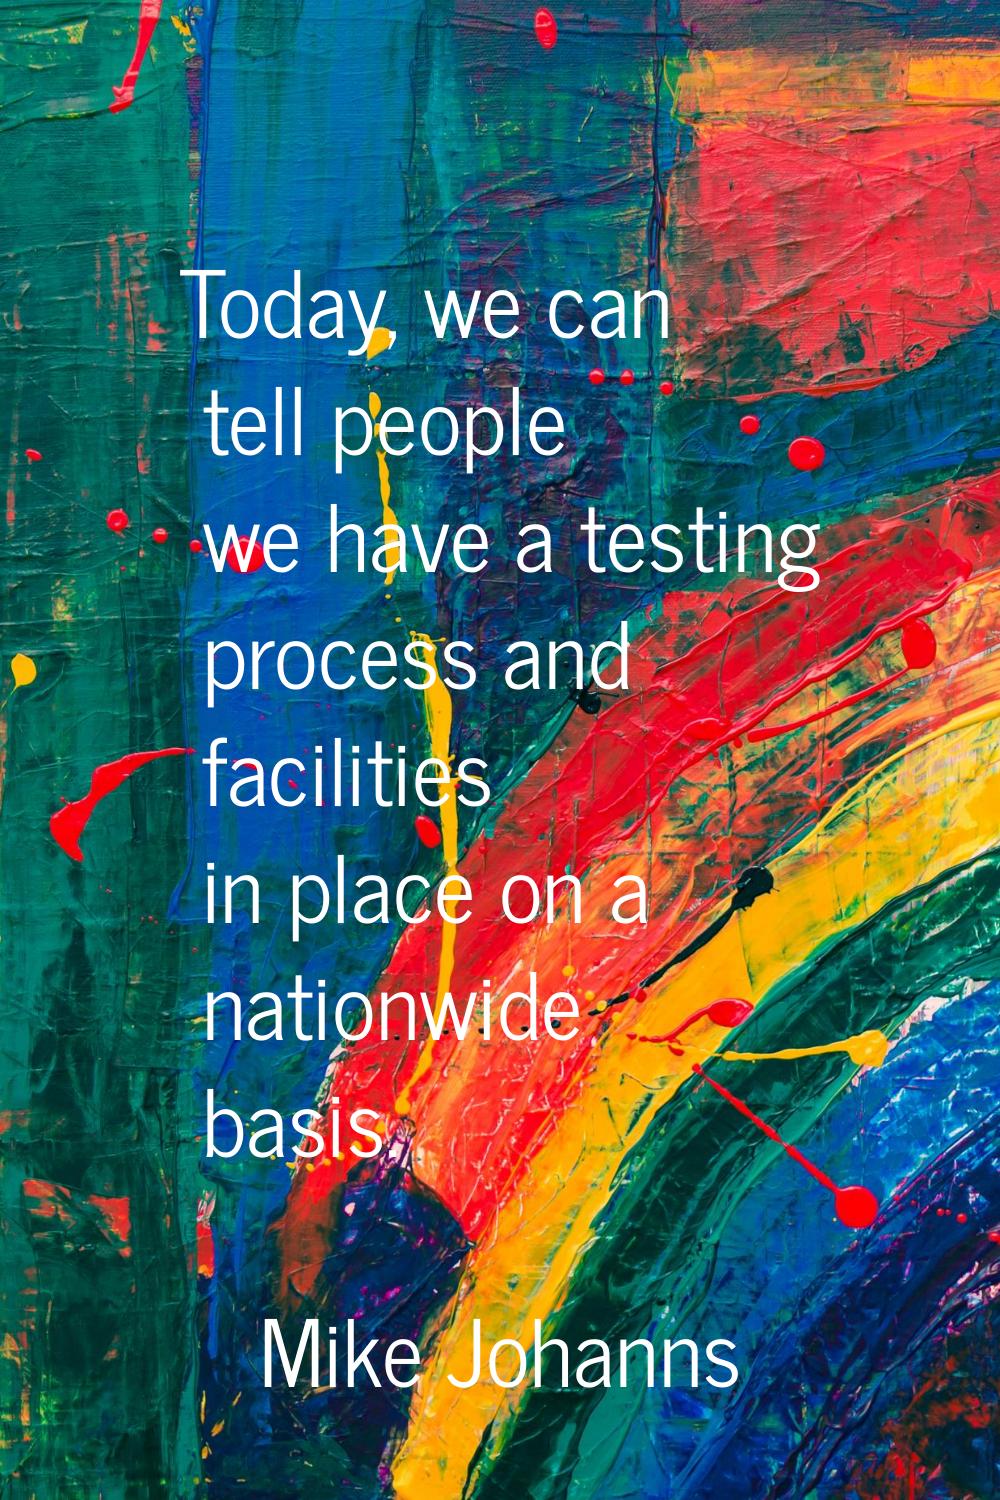 Today, we can tell people we have a testing process and facilities in place on a nationwide basis.